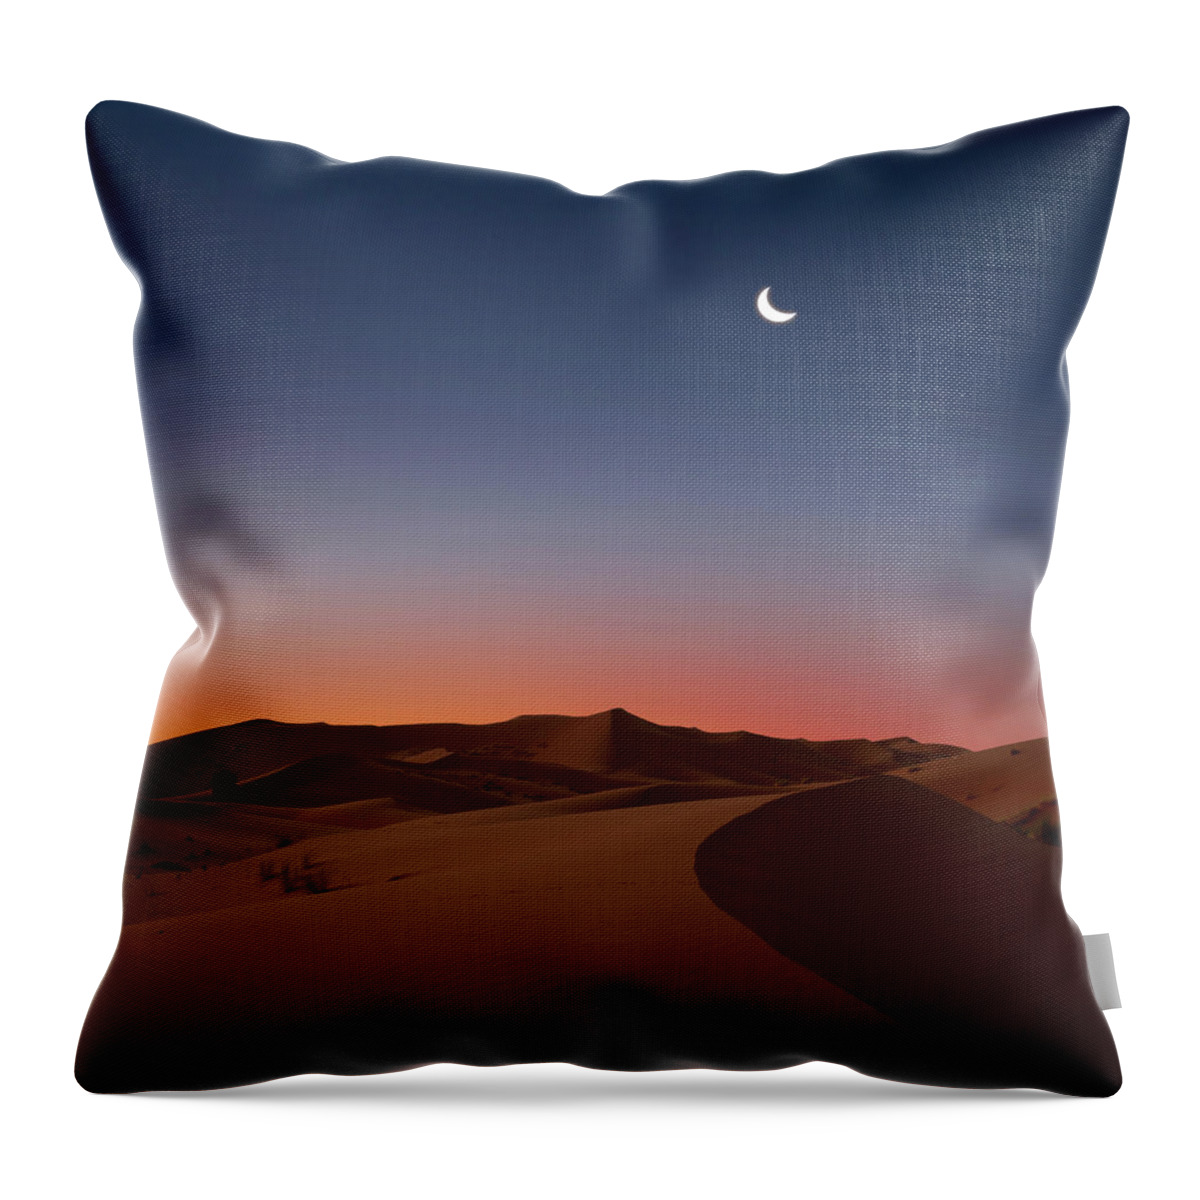 Tranquility Throw Pillow featuring the photograph Crescent Moon Over Dunes by Photo By John Quintero